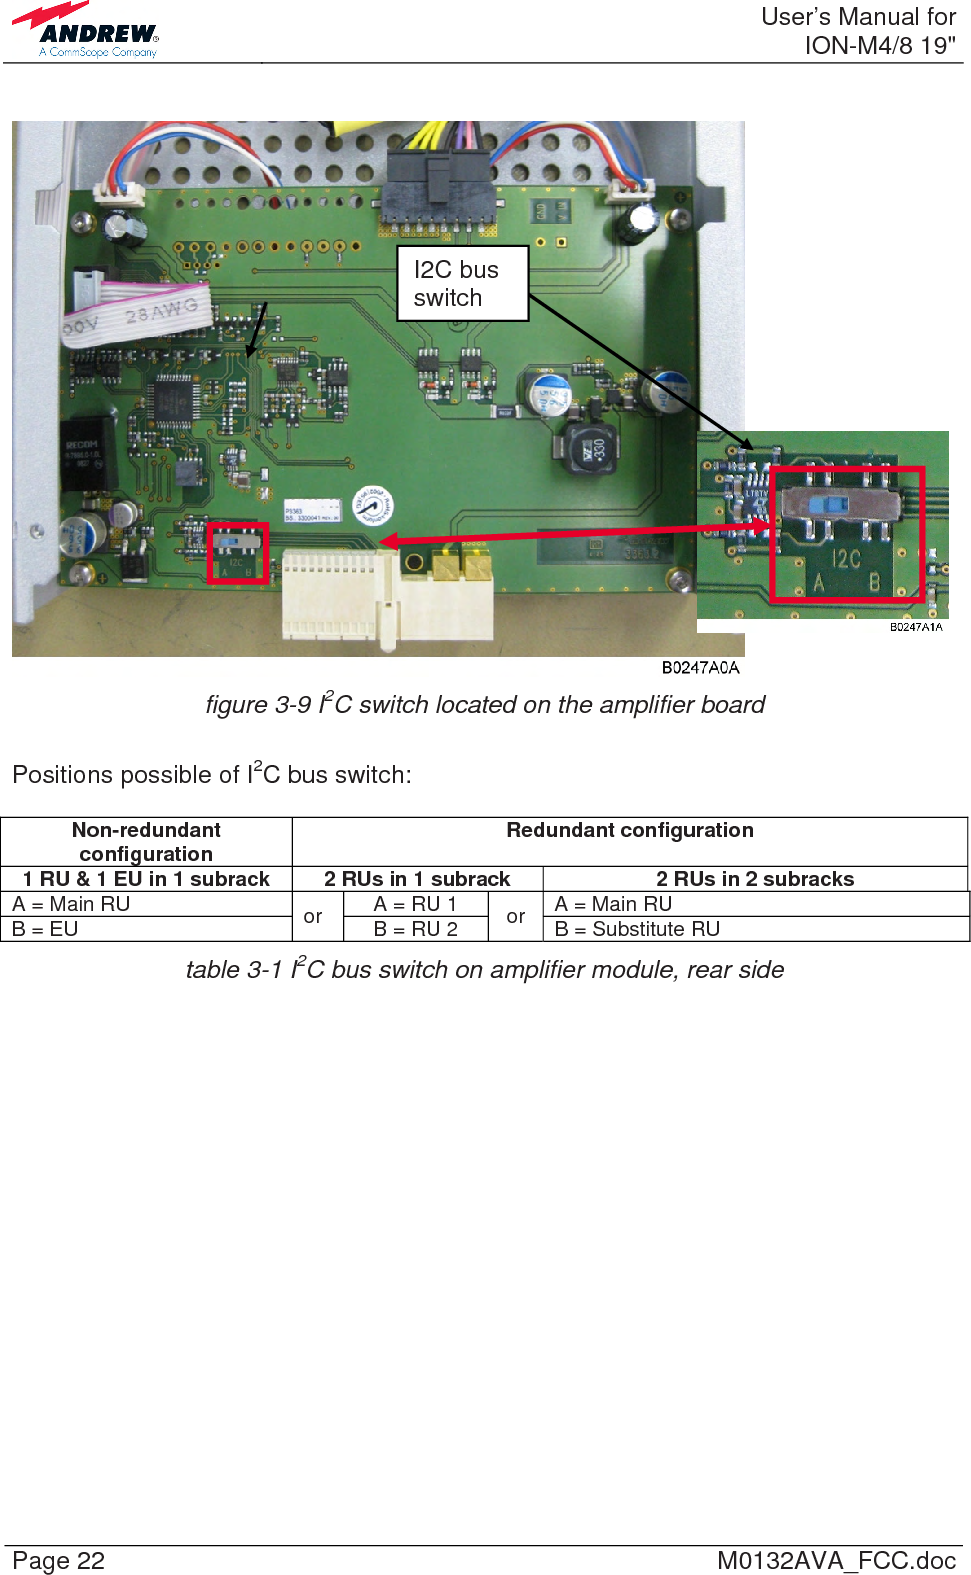  User’s Manual forION-M4/8 19&quot; Page 22  M0132AVA_FCC.doc    figure 3-9 I2C switch located on the amplifier board  Positions possible of I2C bus switch:  Non-redundant configuration  Redundant configuration 1 RU &amp; 1 EU in 1 subrack  2 RUs in 1 subrack  2 RUs in 2 subracks A = Main RU  A = RU 1   A = Main RU B = EU  or  B = RU 2   or  B = Substitute RU table 3-1 I2C bus switch on amplifier module, rear side   I2C bus switch 